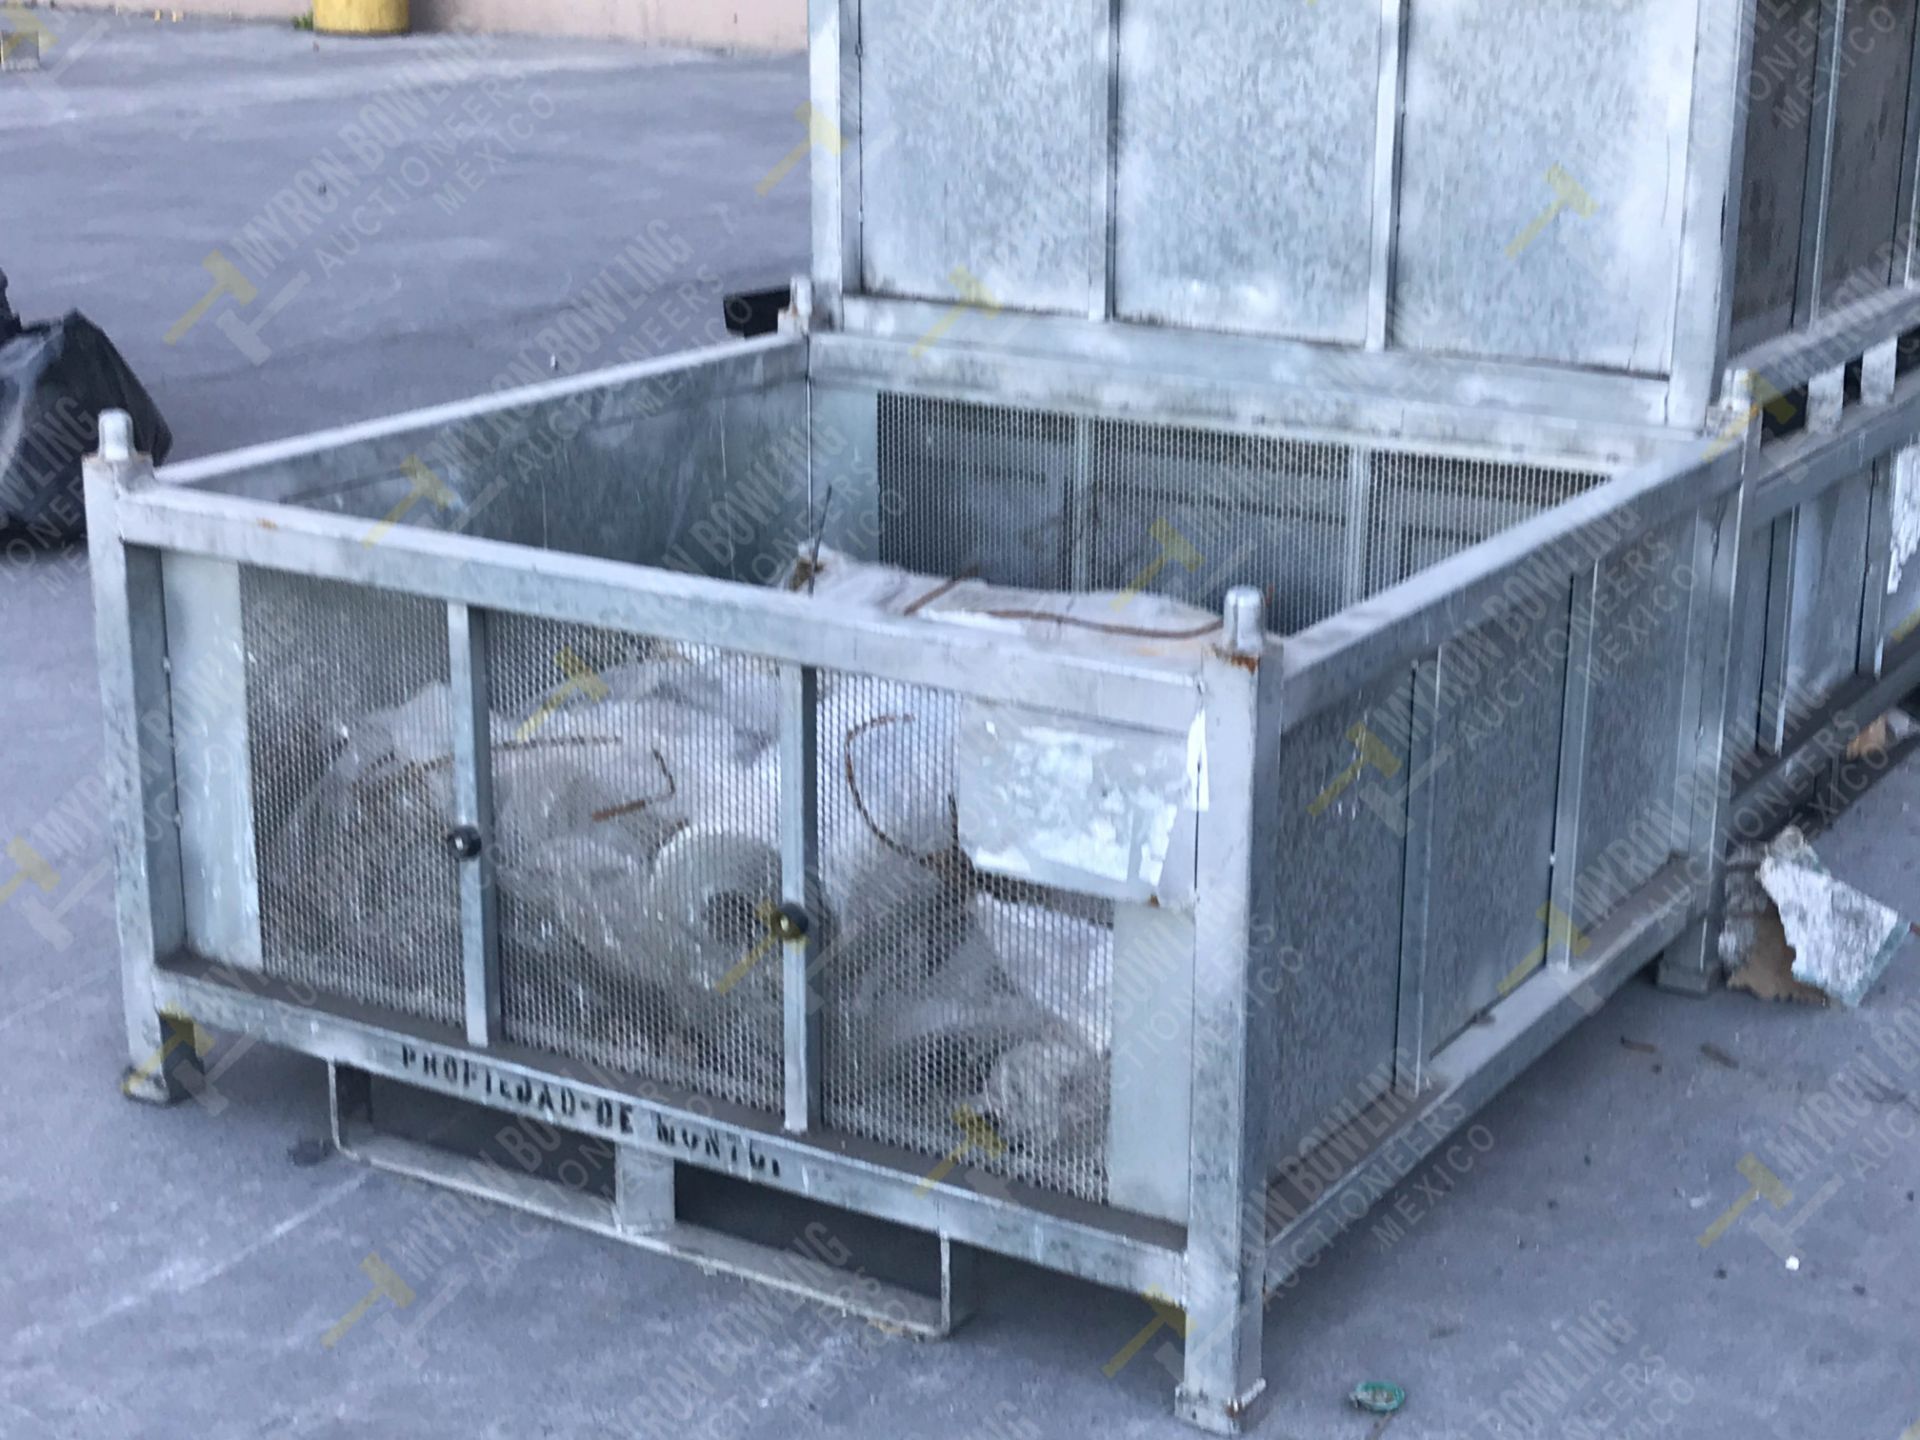 70 GALVANIZED STEEL CONTAINERS XYTEC (DIMENSIONS 0.60x1.32x1.24 METERS)